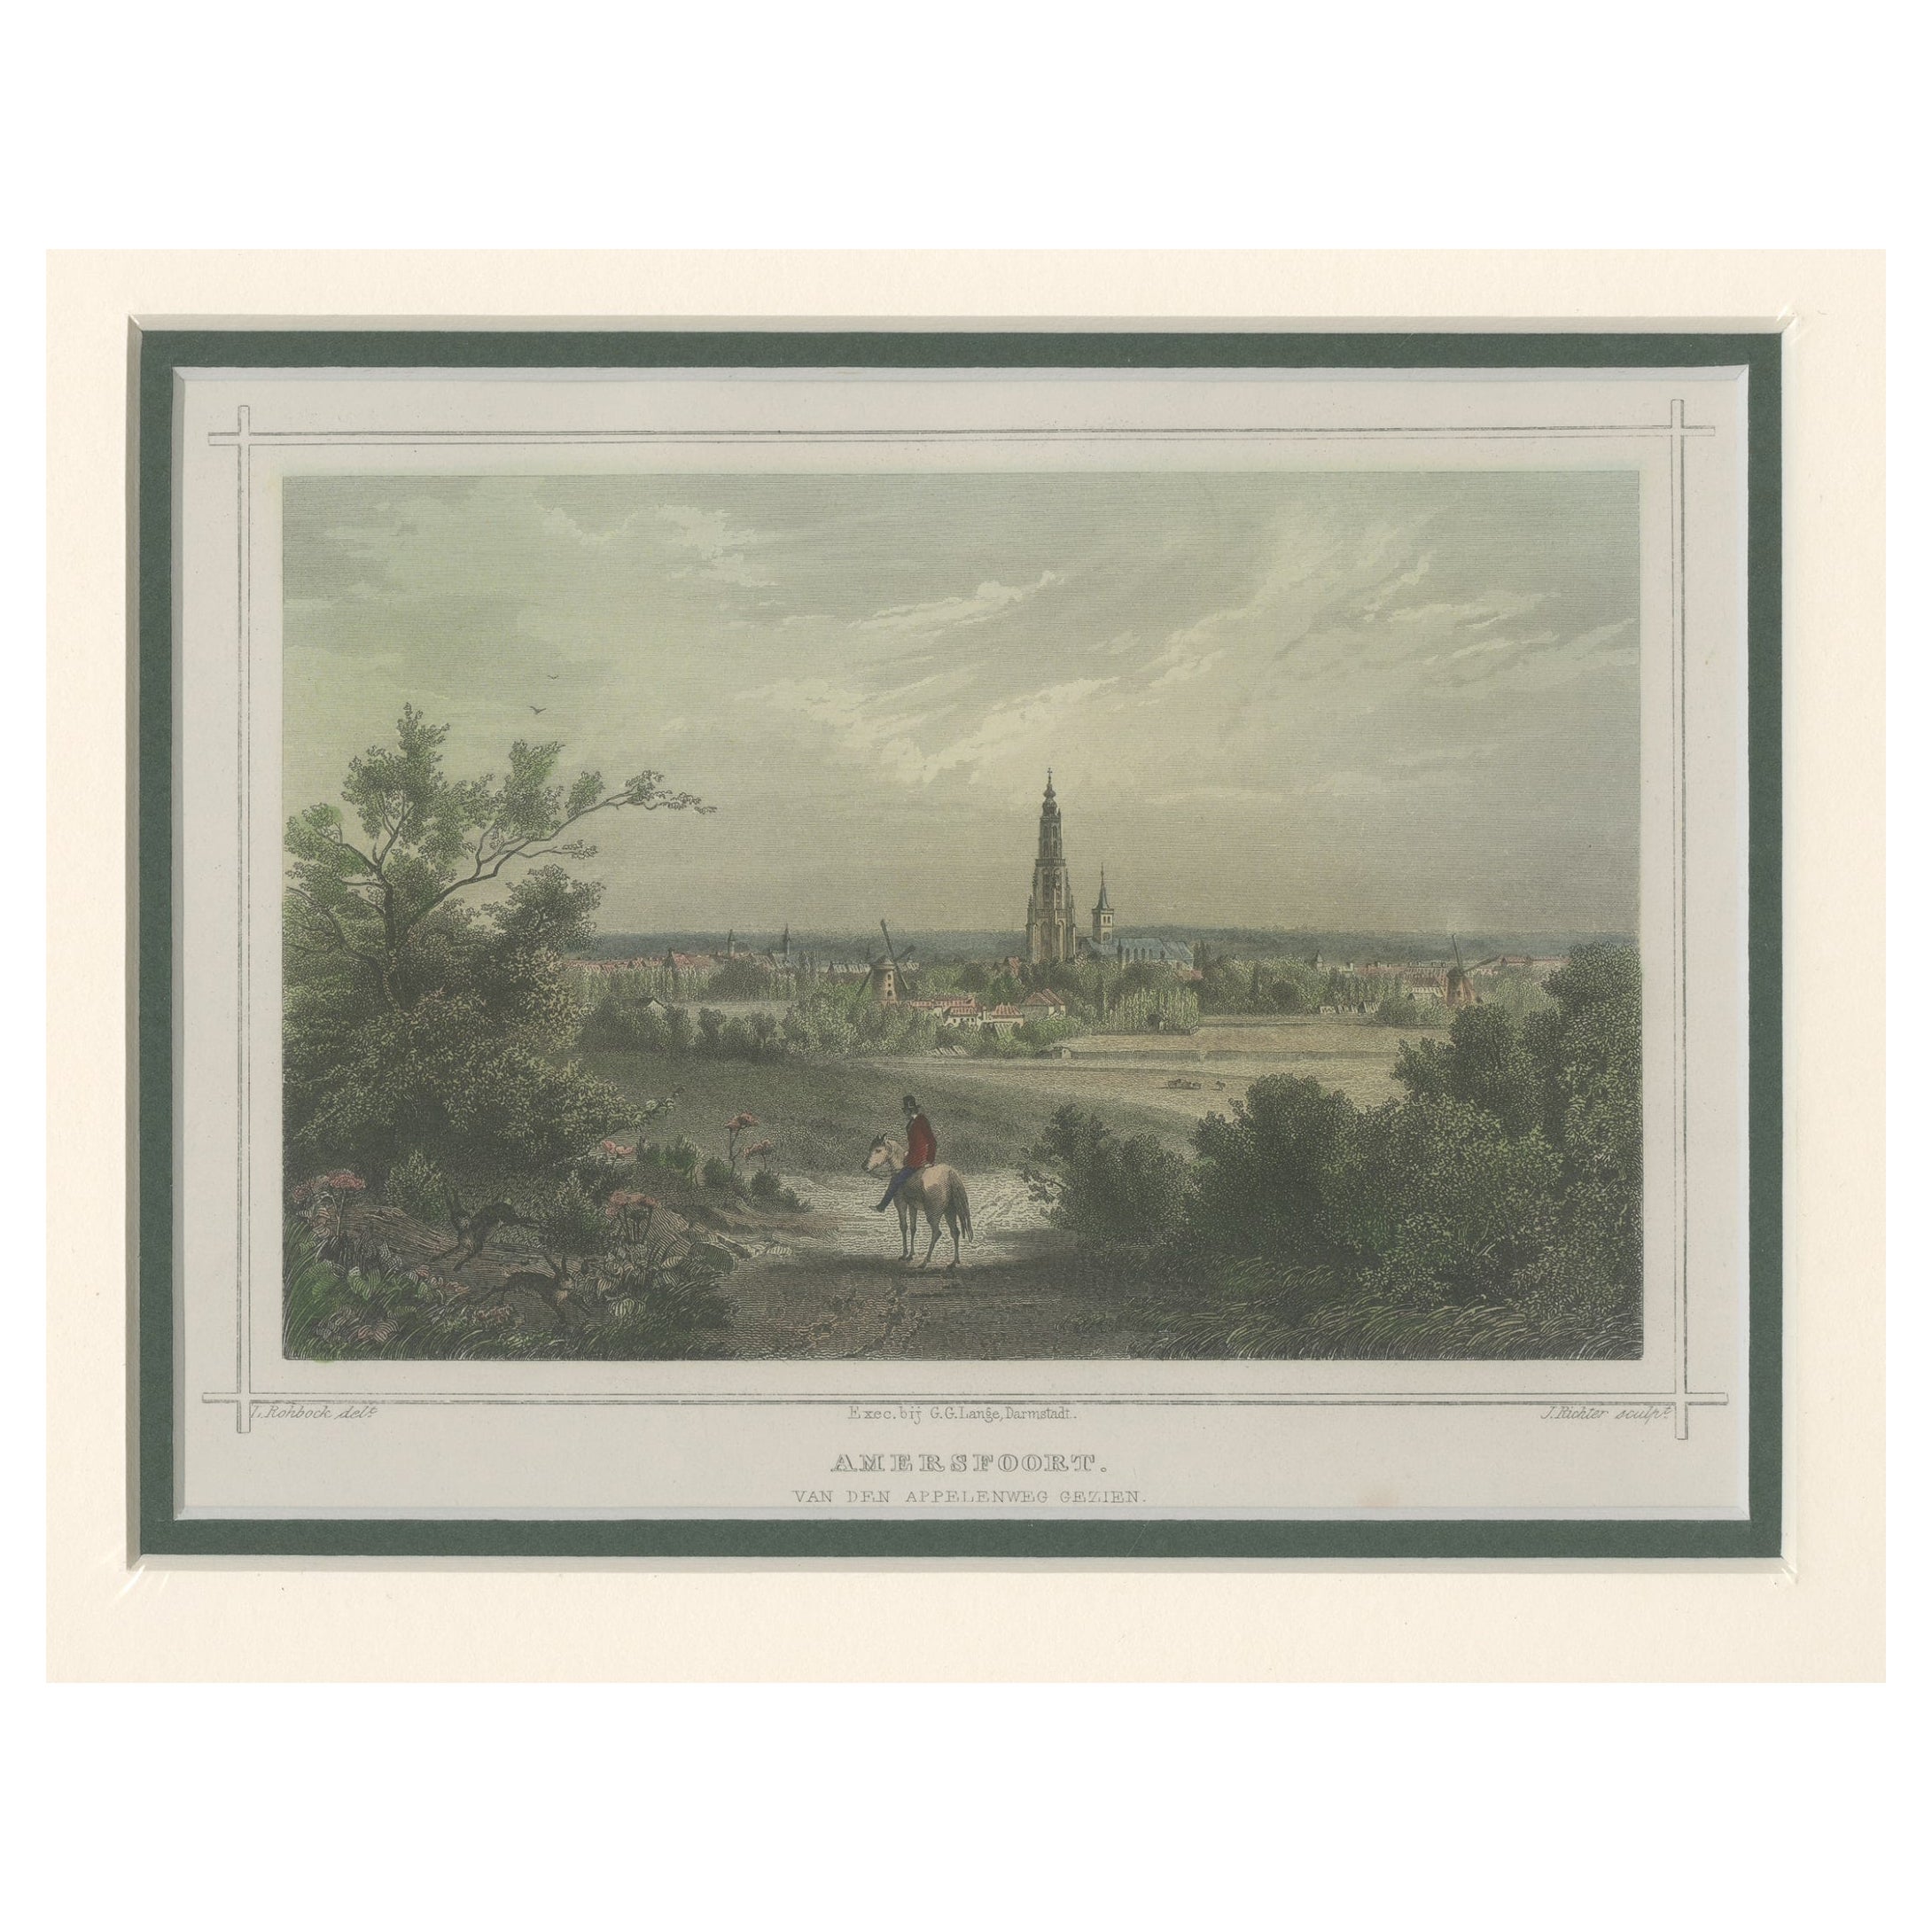 Nicely Hand-Colored View of the City of Amersfoort, The Netherlands, 1858